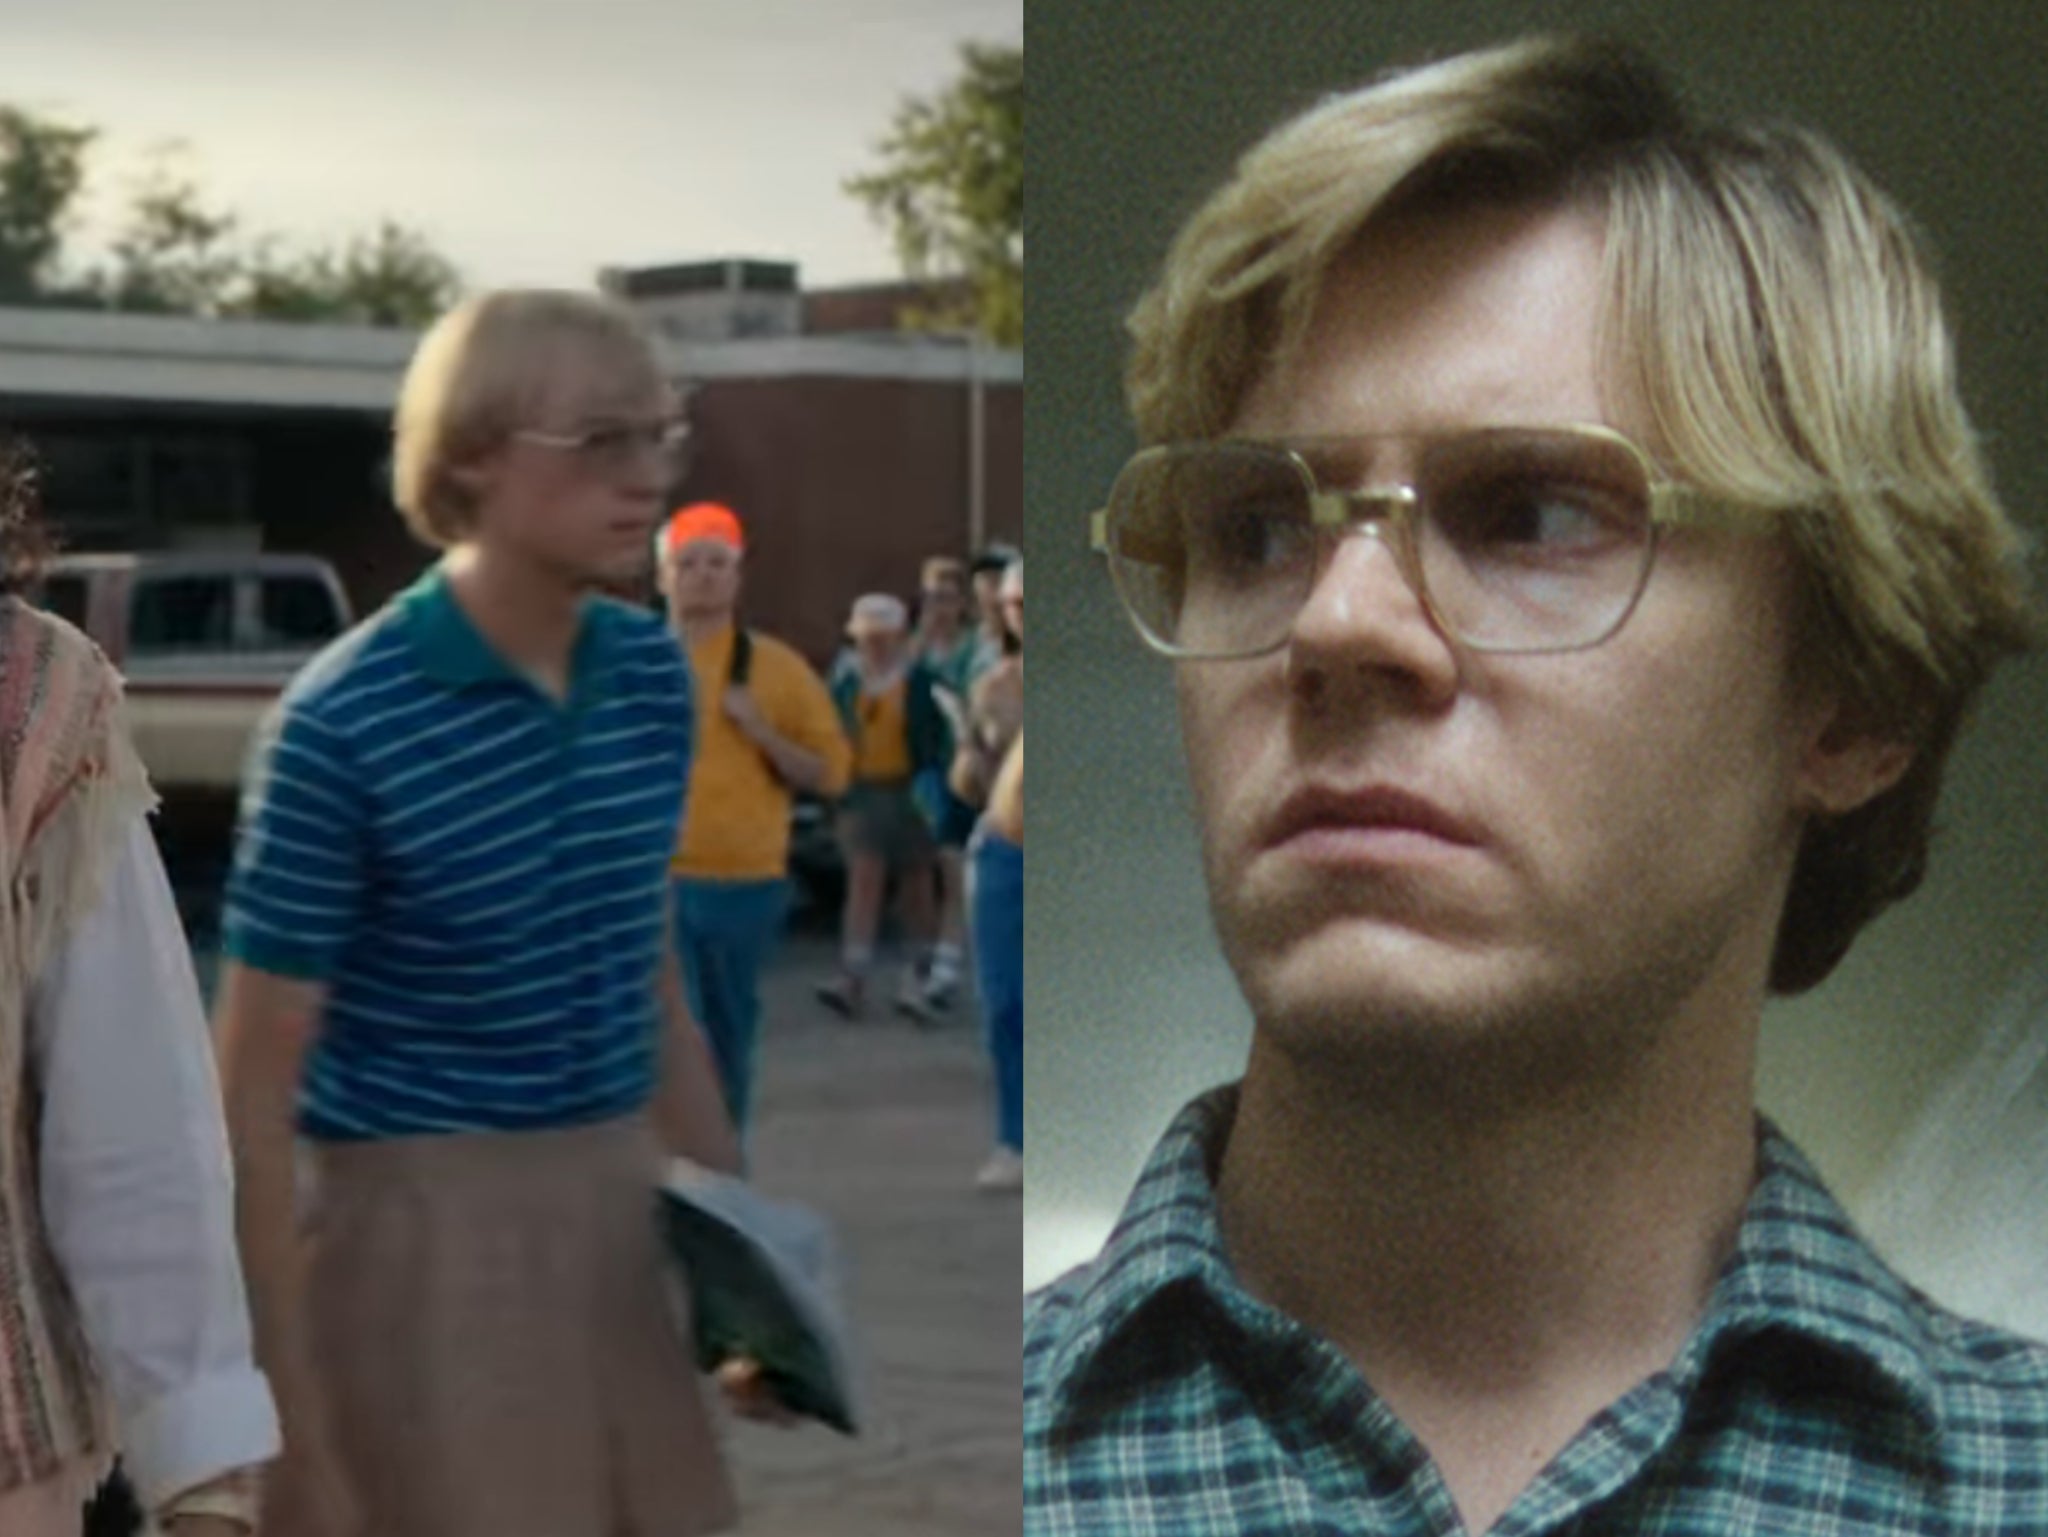 Pics Of Jeffrey Dahmer Stranger Things fans 'spot Jeffrey Dahmer' in background of recent episode  | The Independent